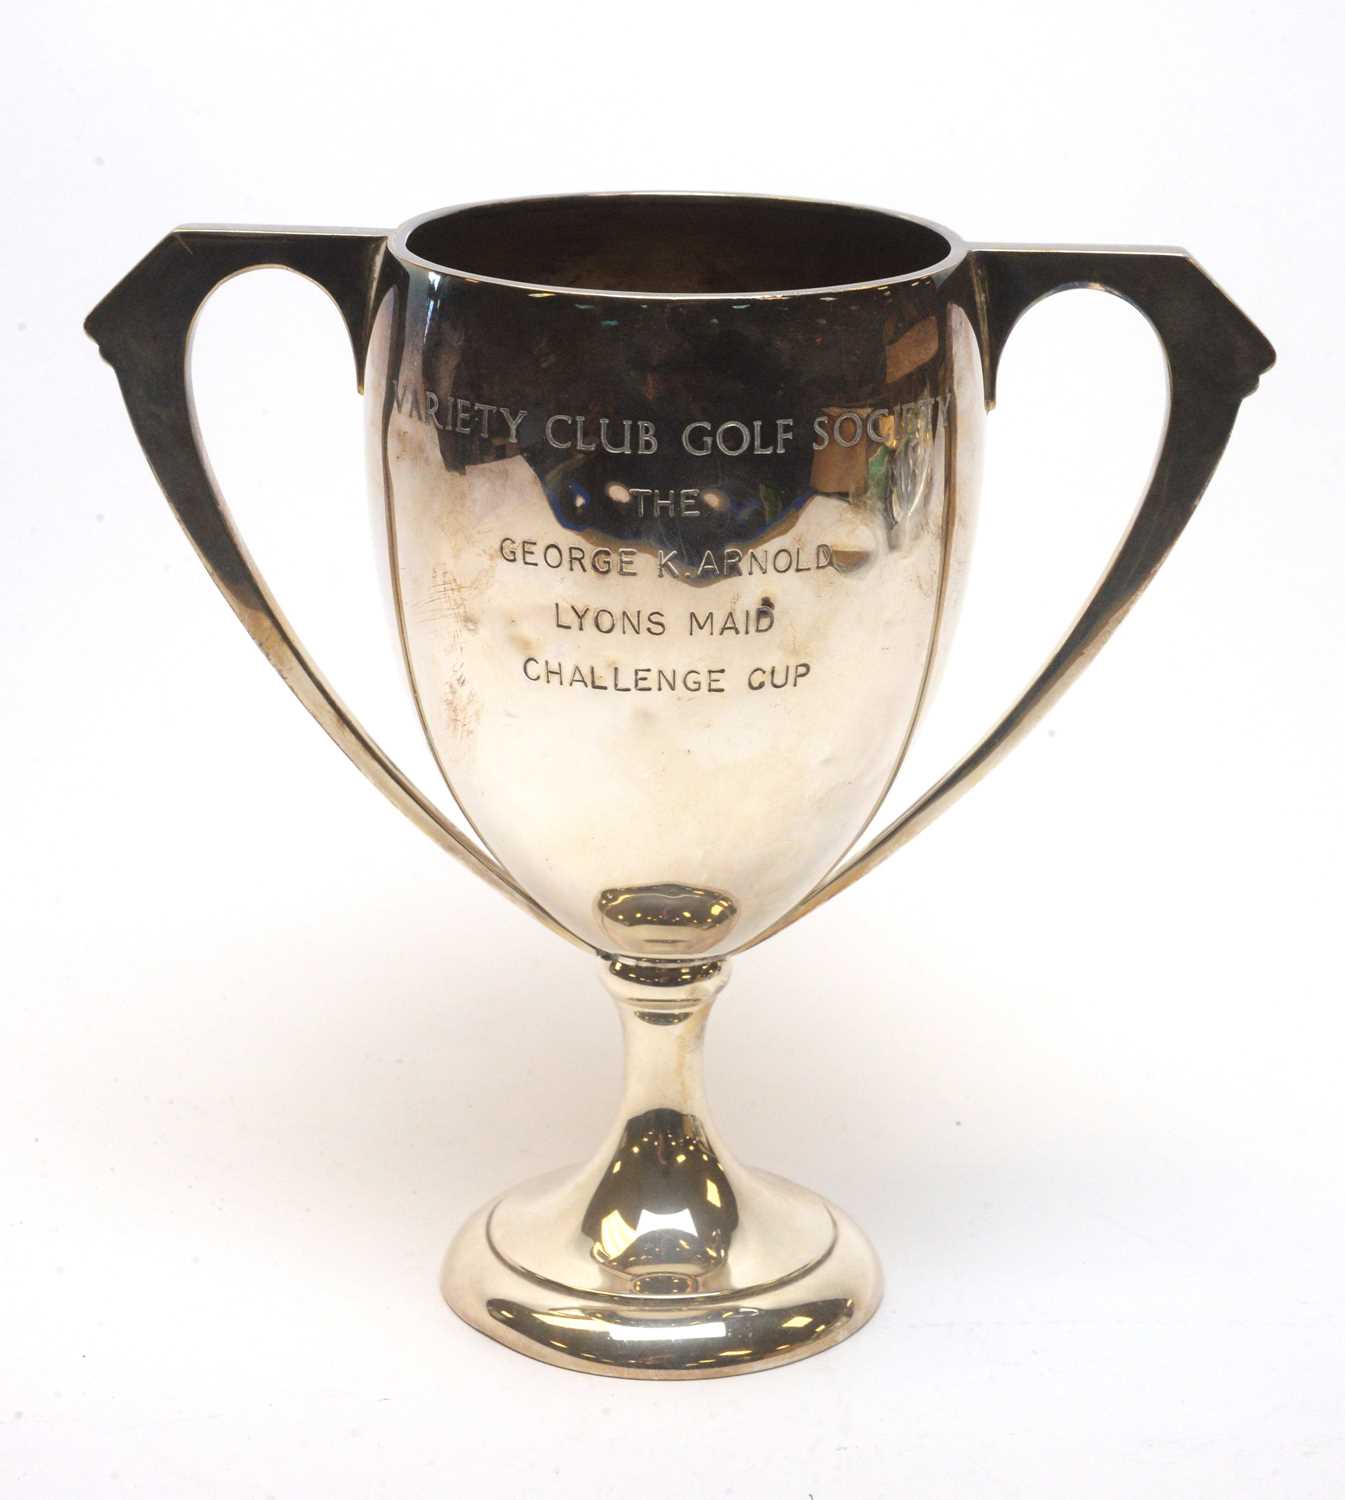 Lot 203 - Two-handled silver trophy cup